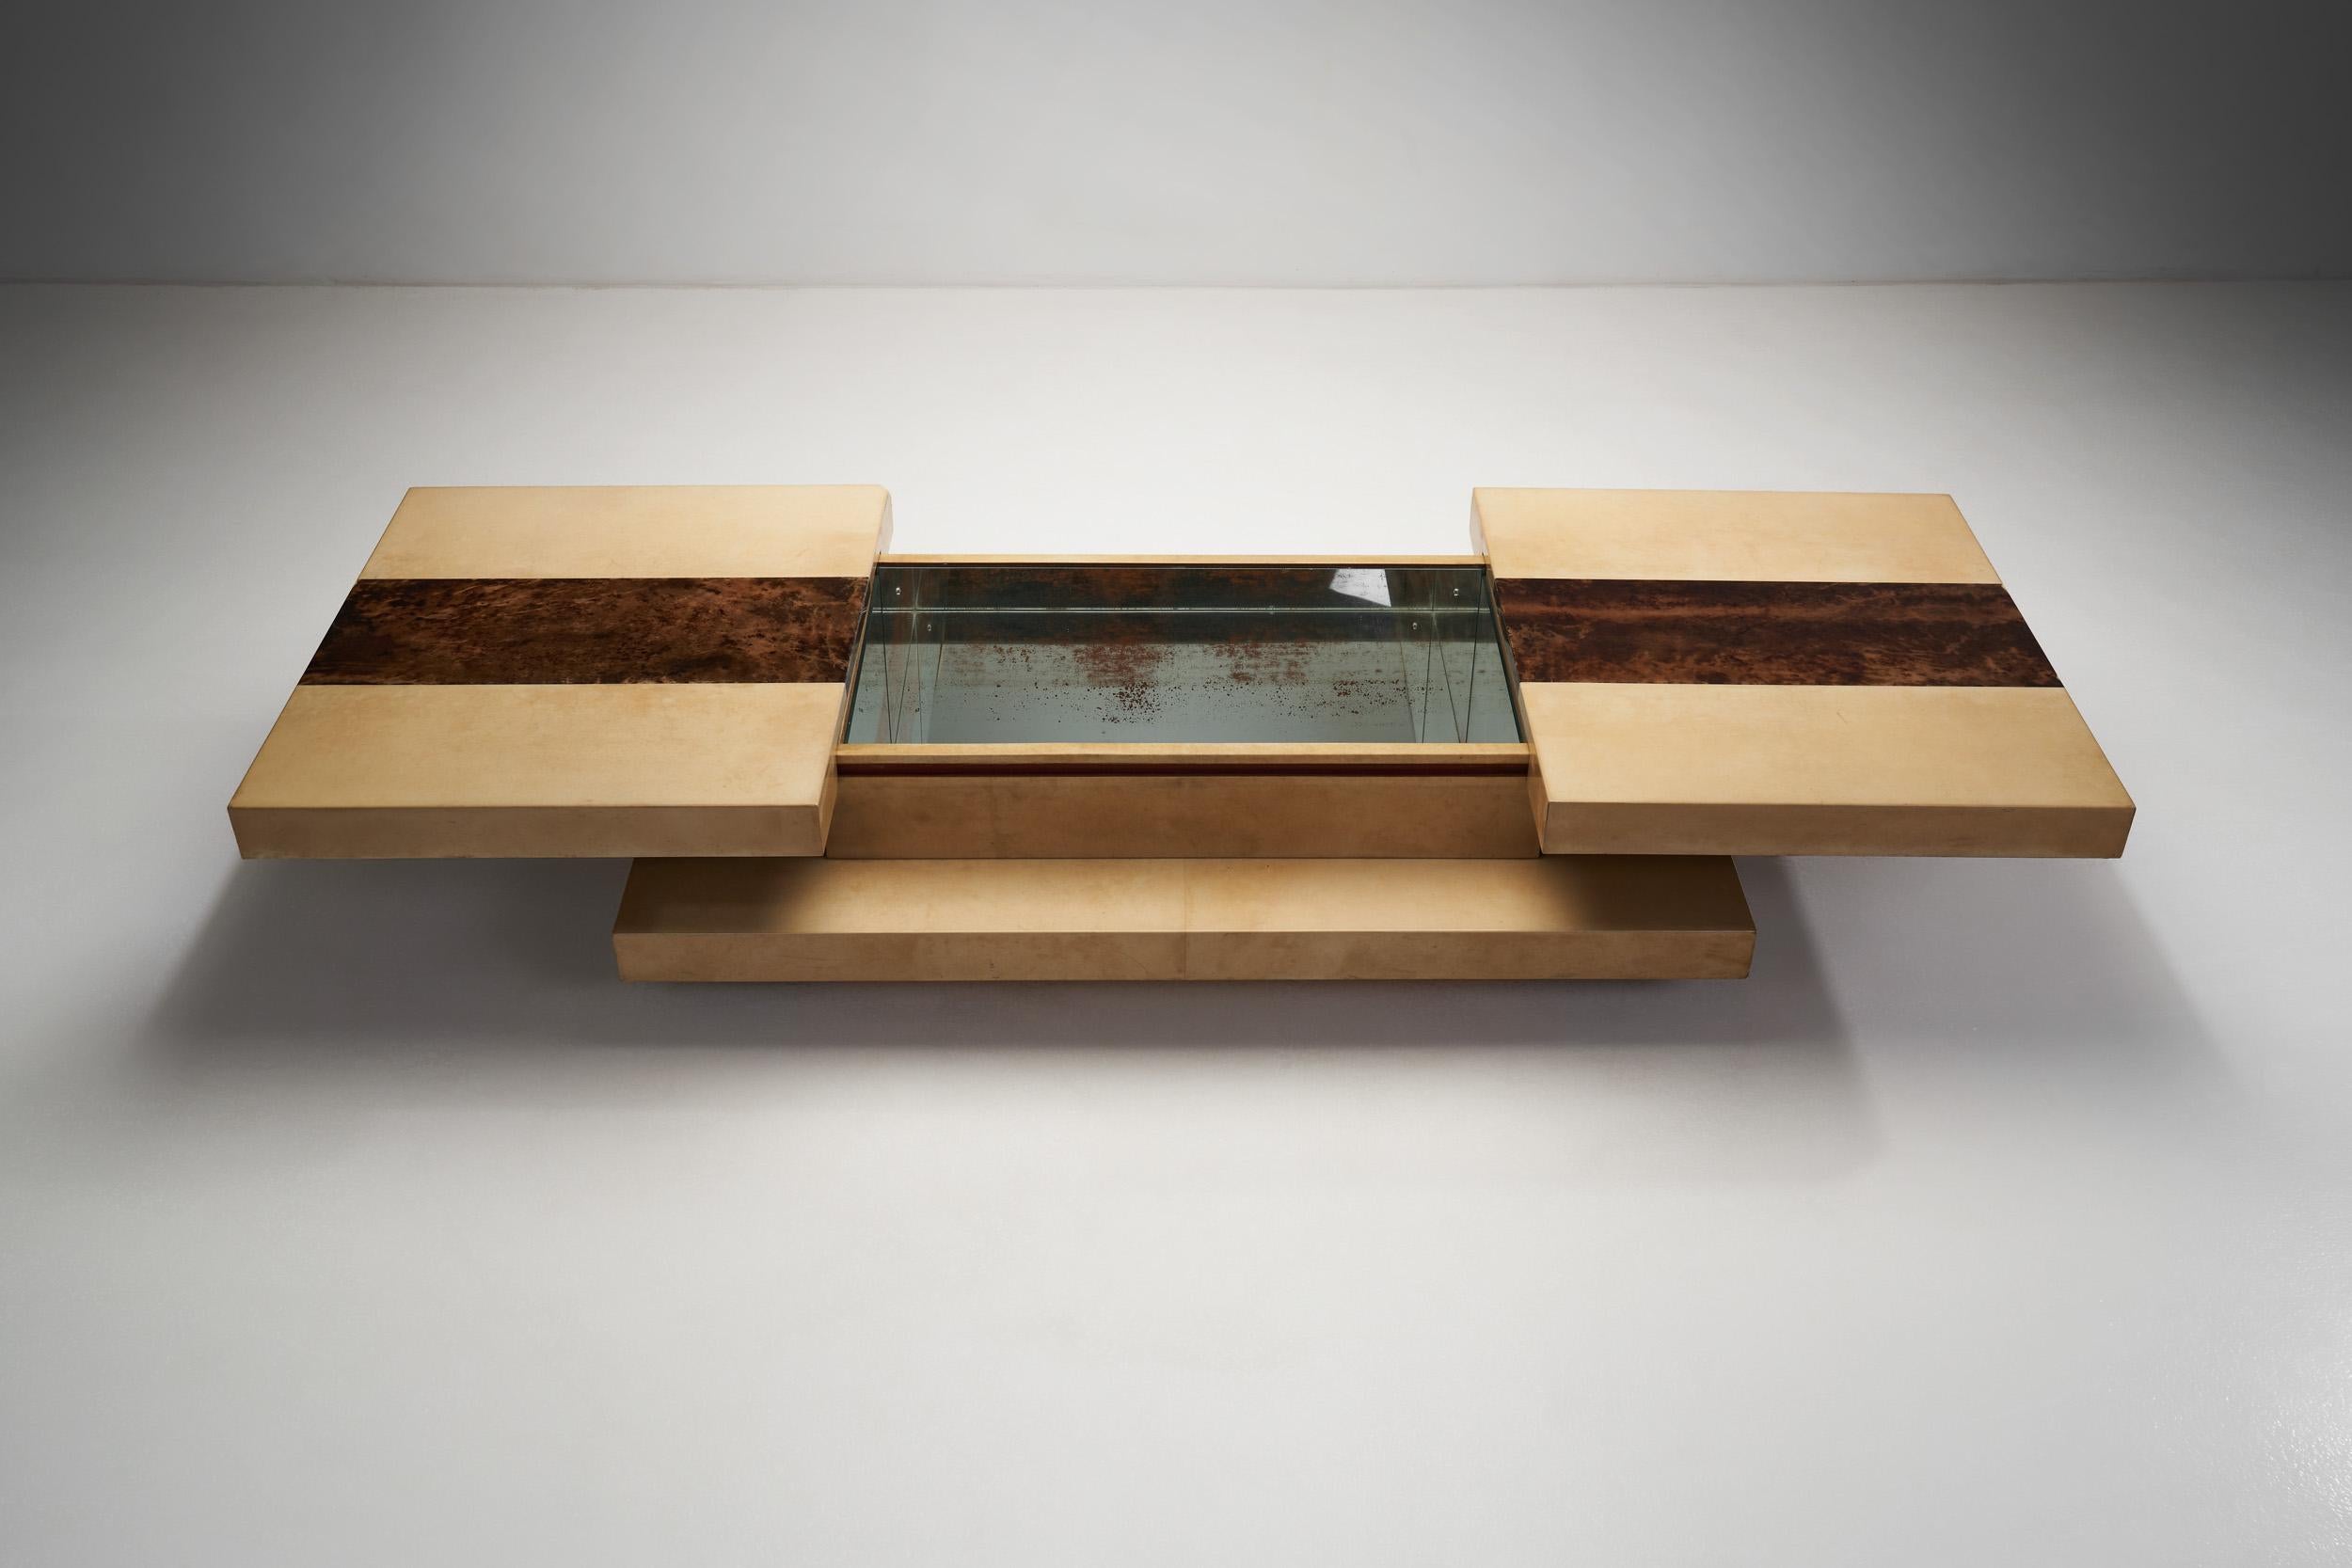 Two-Tiered Sliding Coffee Table with Hidden Bar by Aldo Tura, Italy 1970s For Sale 1